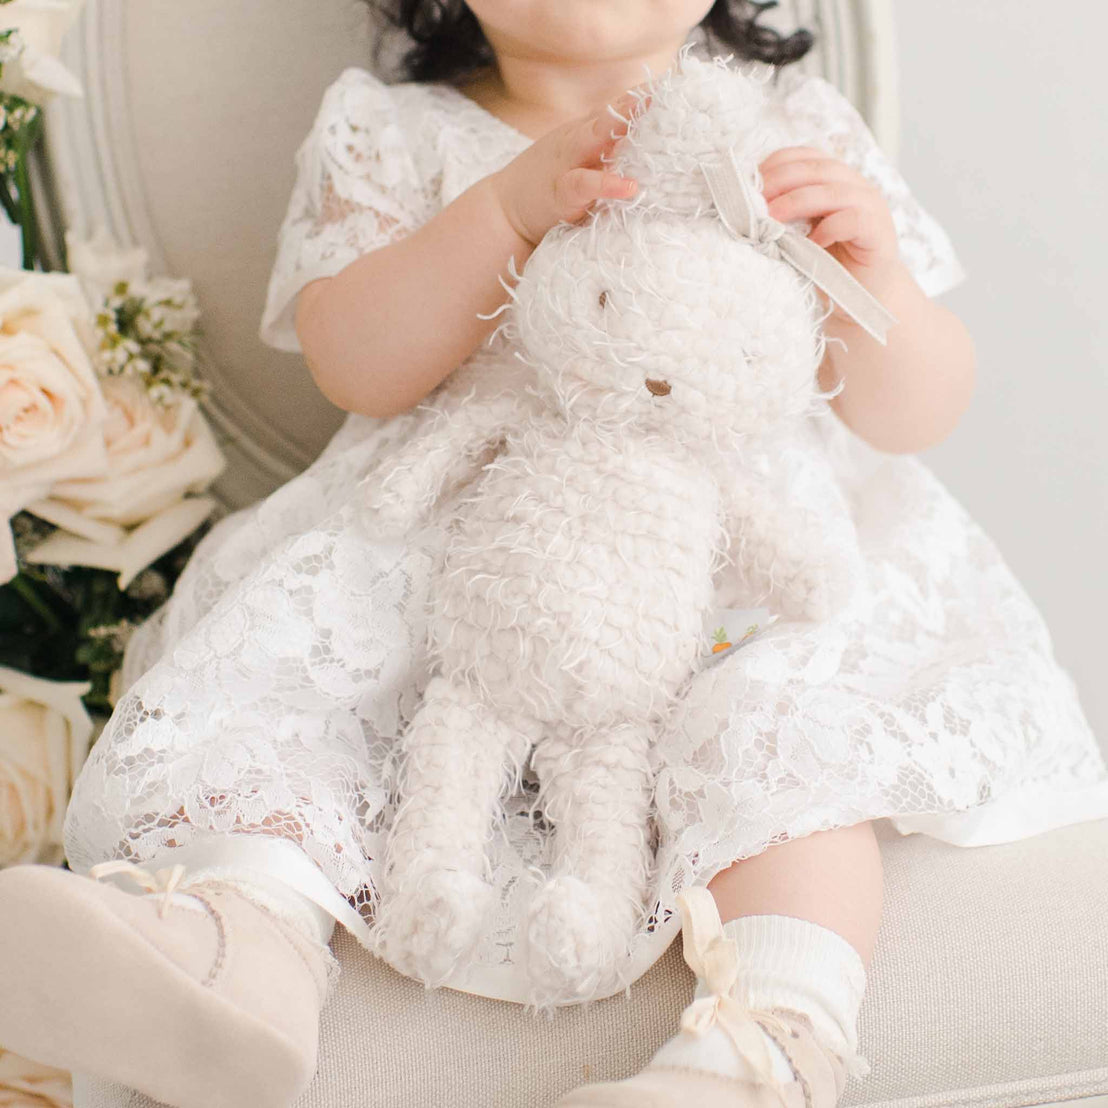 A toddler in a traditional white lace dress sits on a chair holding a white plush Rose Bunny, with a vintage bouquet of soft pink roses to the side.